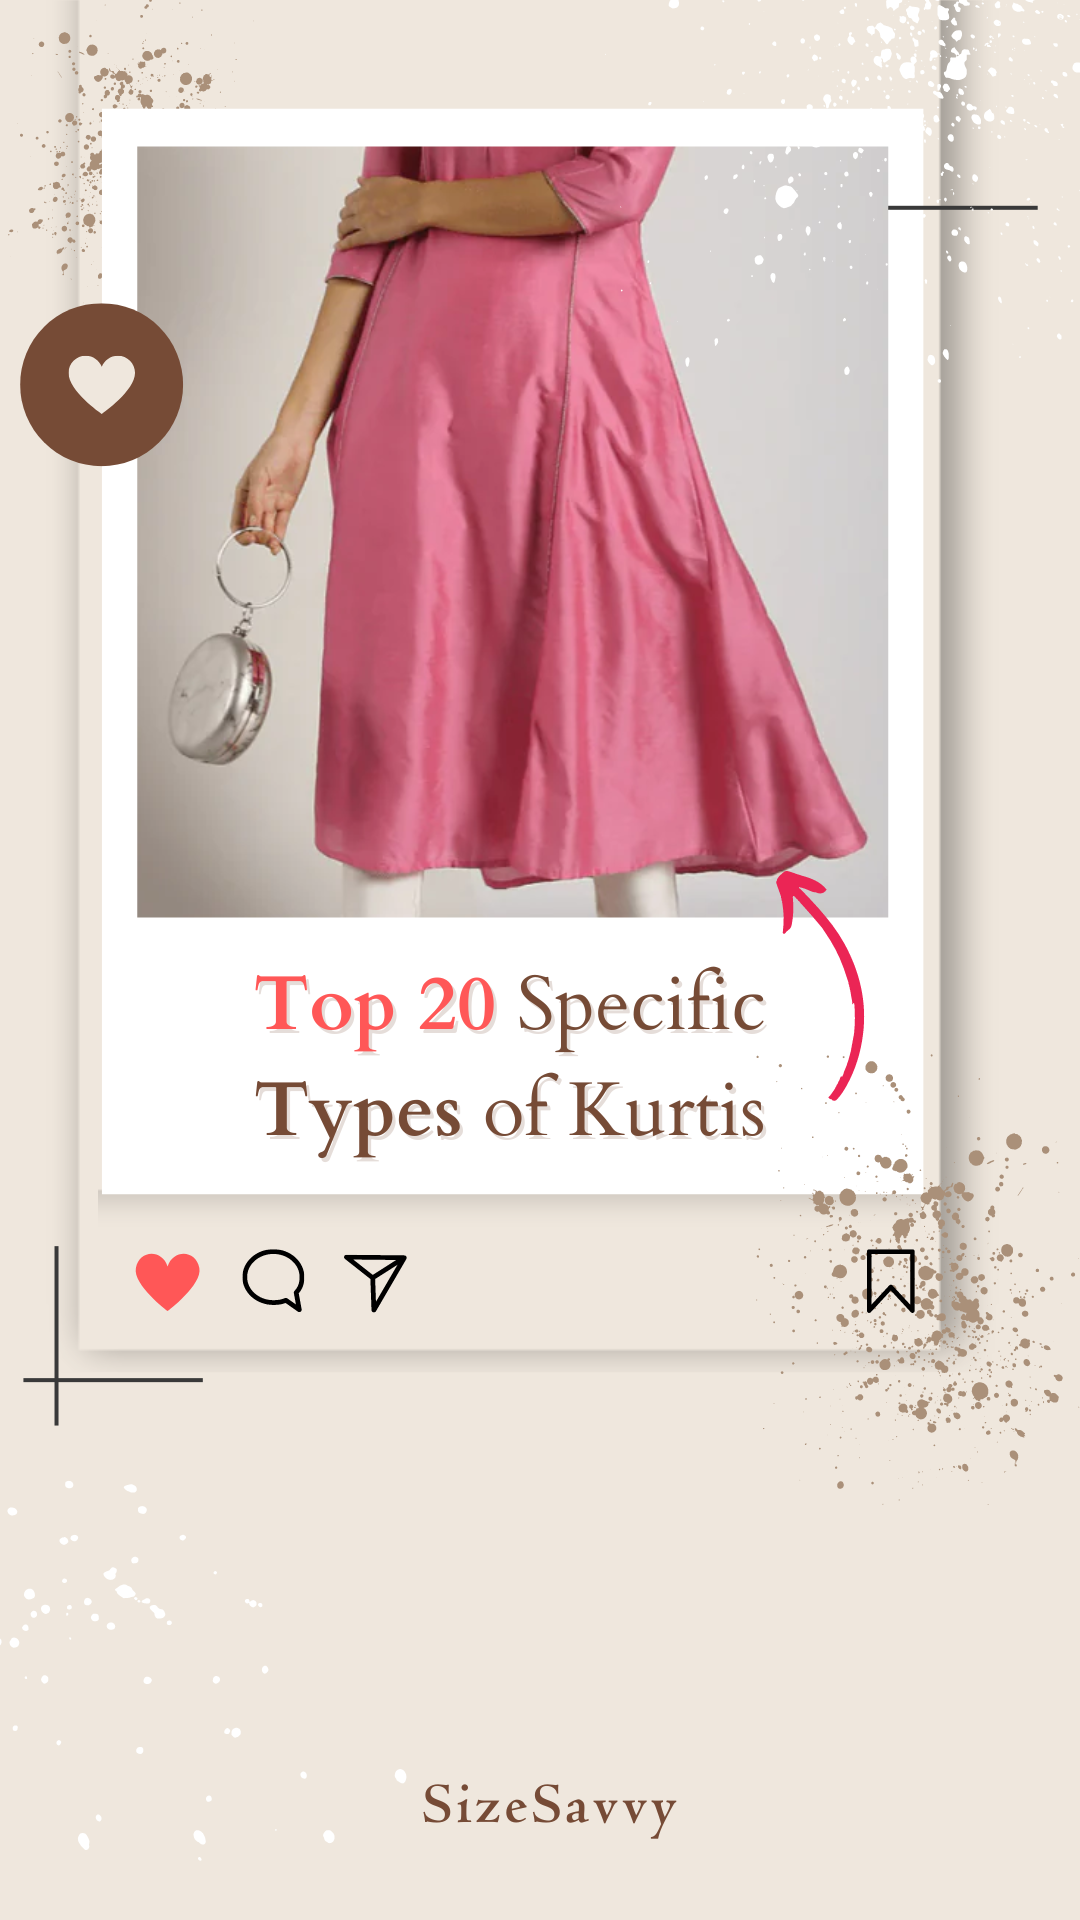 10 Types Of Kurtis And Styling Tips Every Woman Should Know.